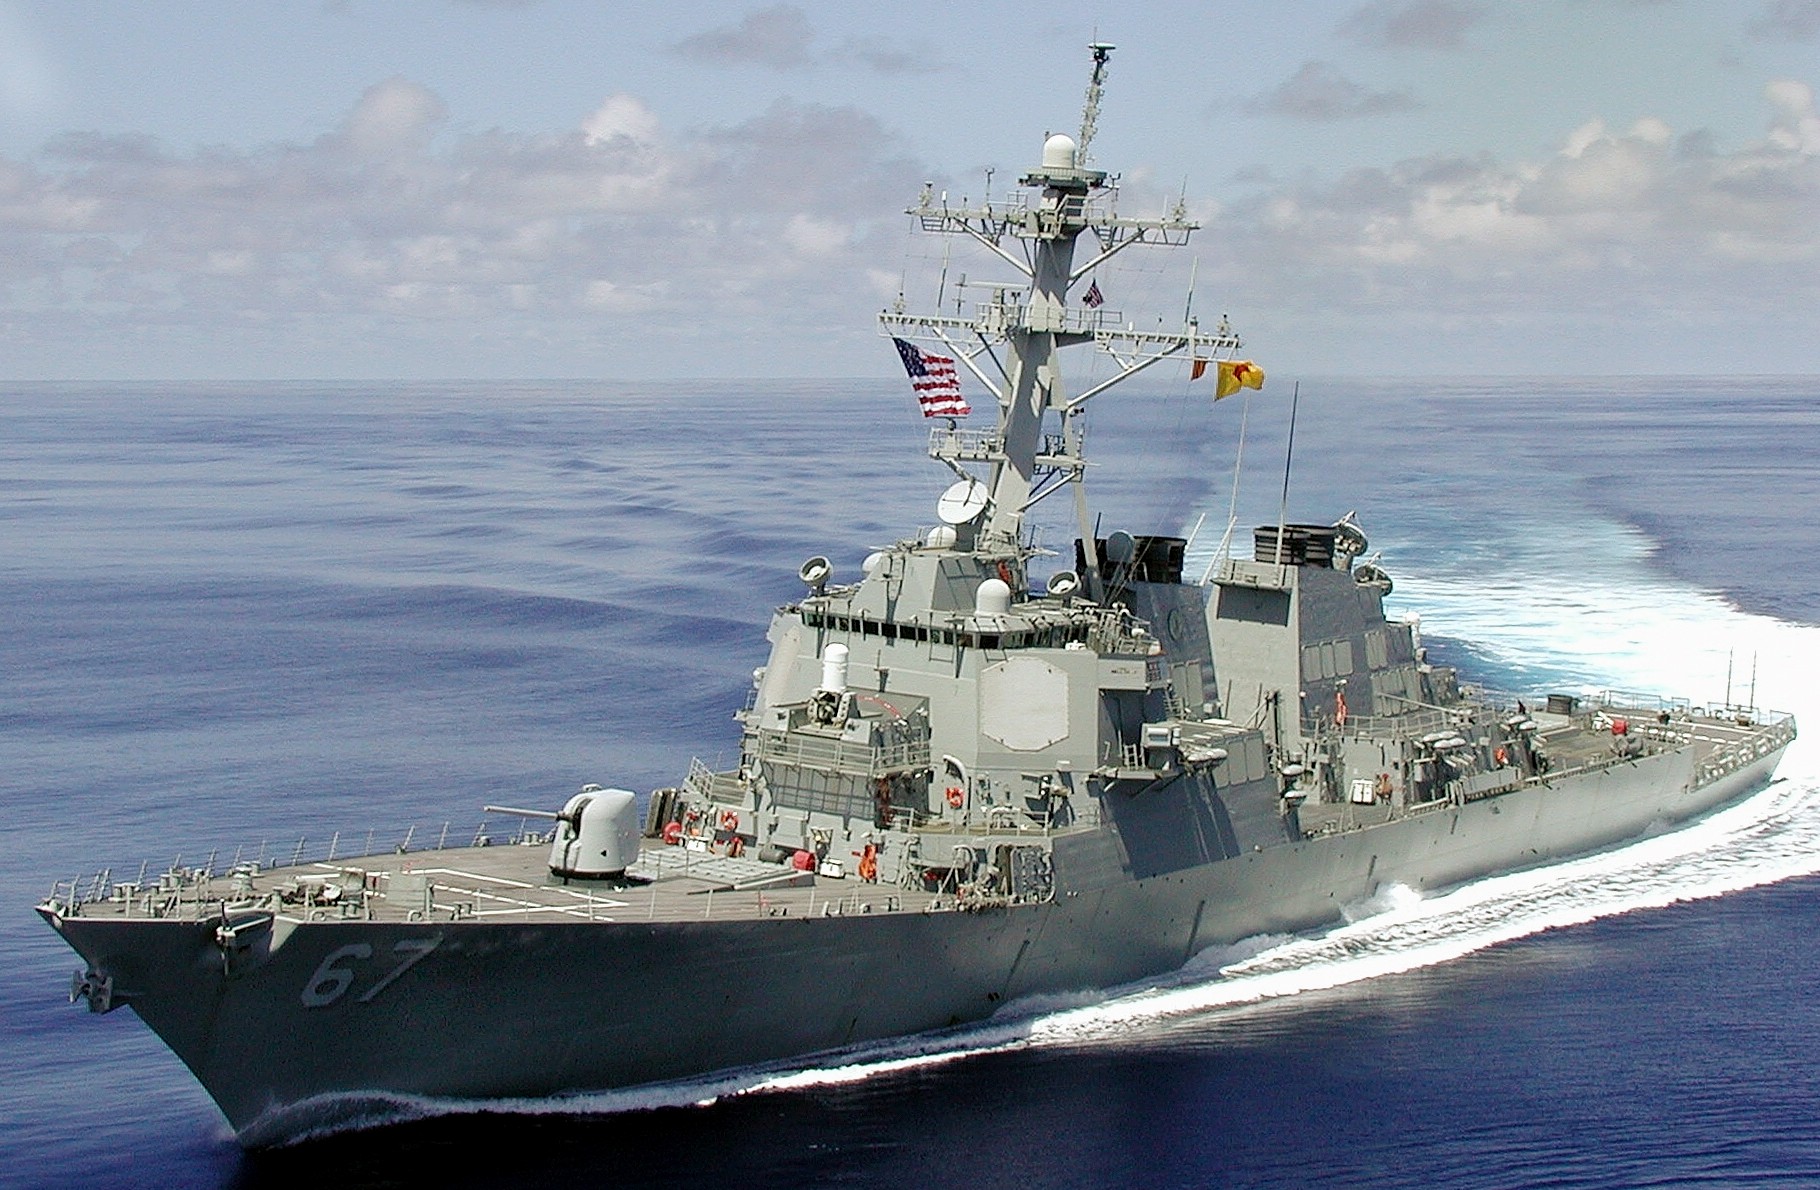 ddg-67 uss cole guided missile destroyer arleigh burke class navy aegis 50